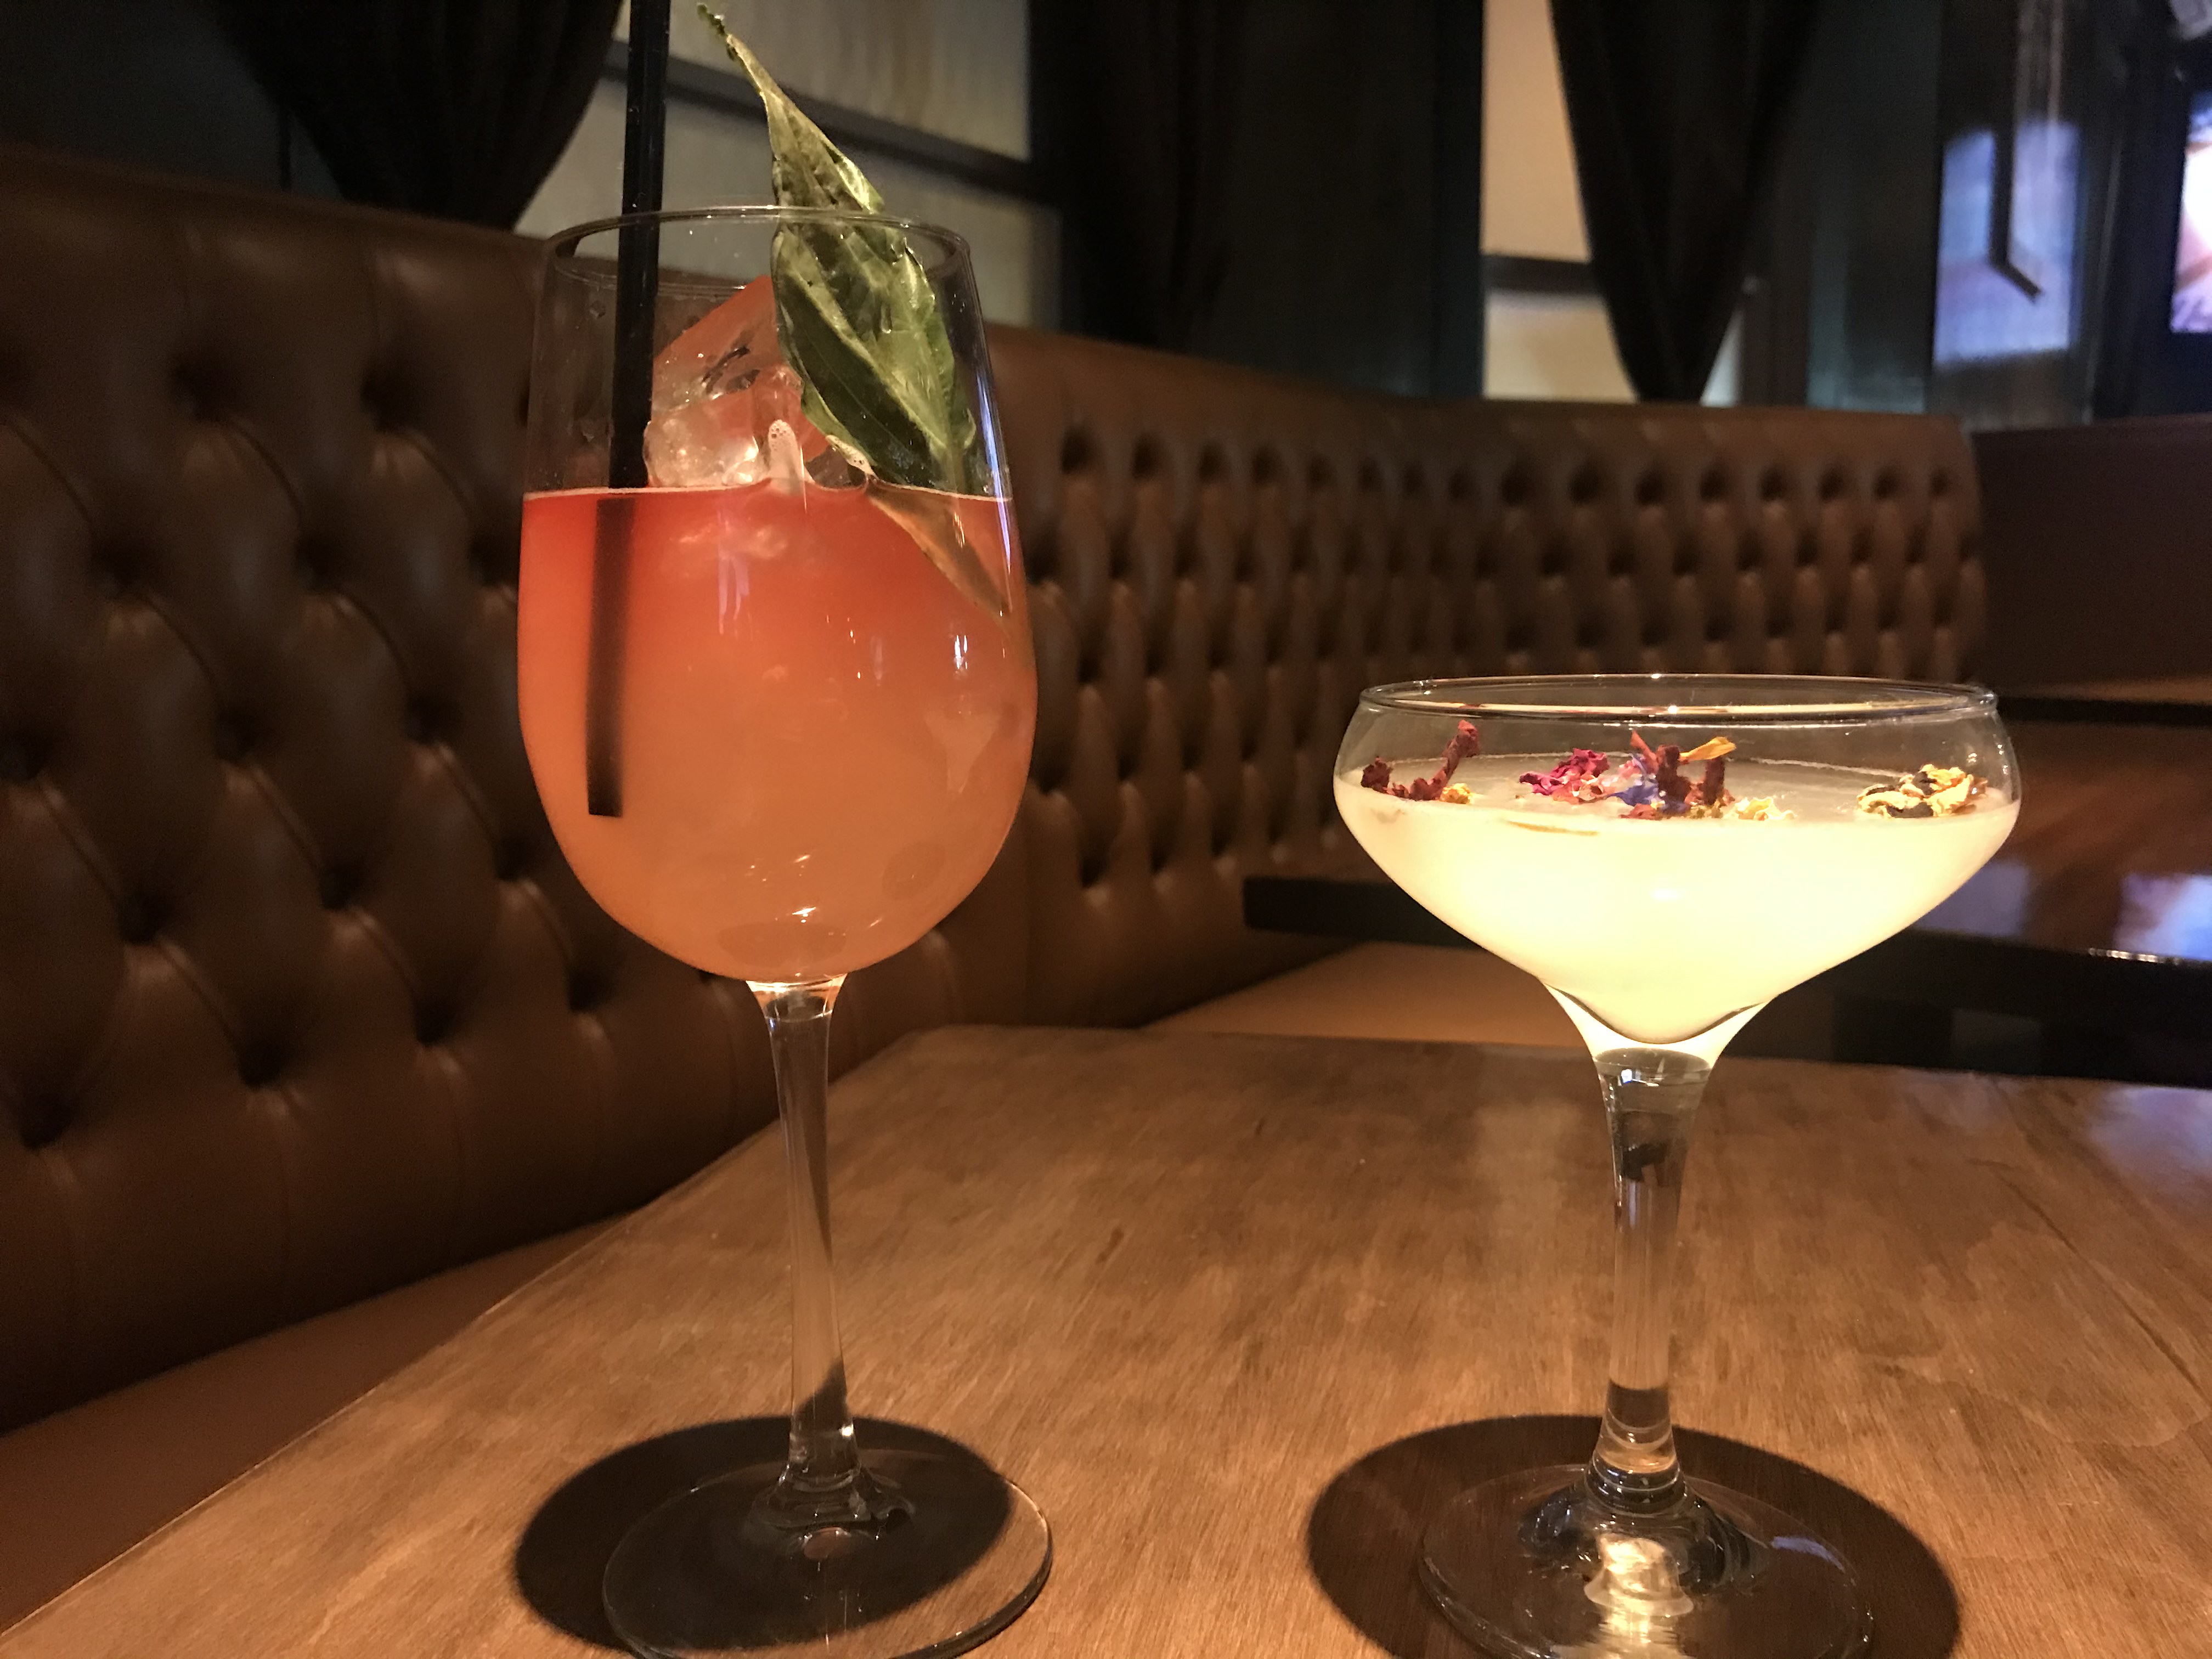 Gaslight Brings Another Option For Craft Cocktails To Uptown D